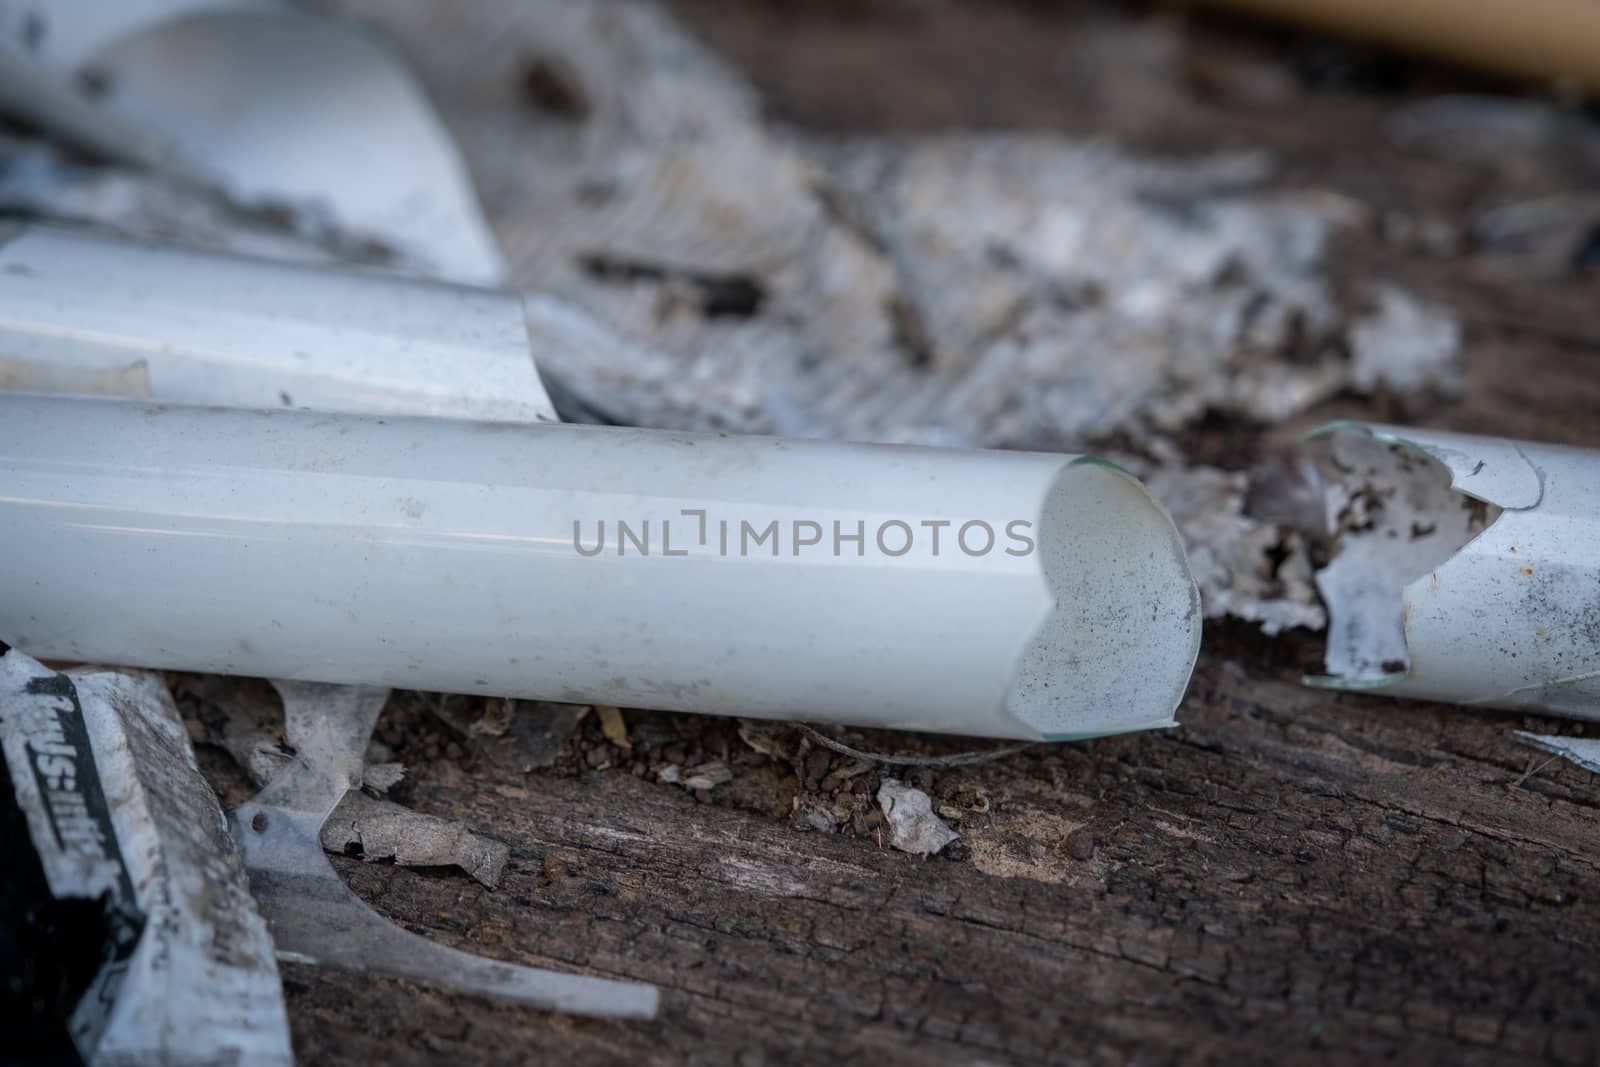 The select focus Pile of broken fluorescent light bulb is danger for health with blur background by peerapixs